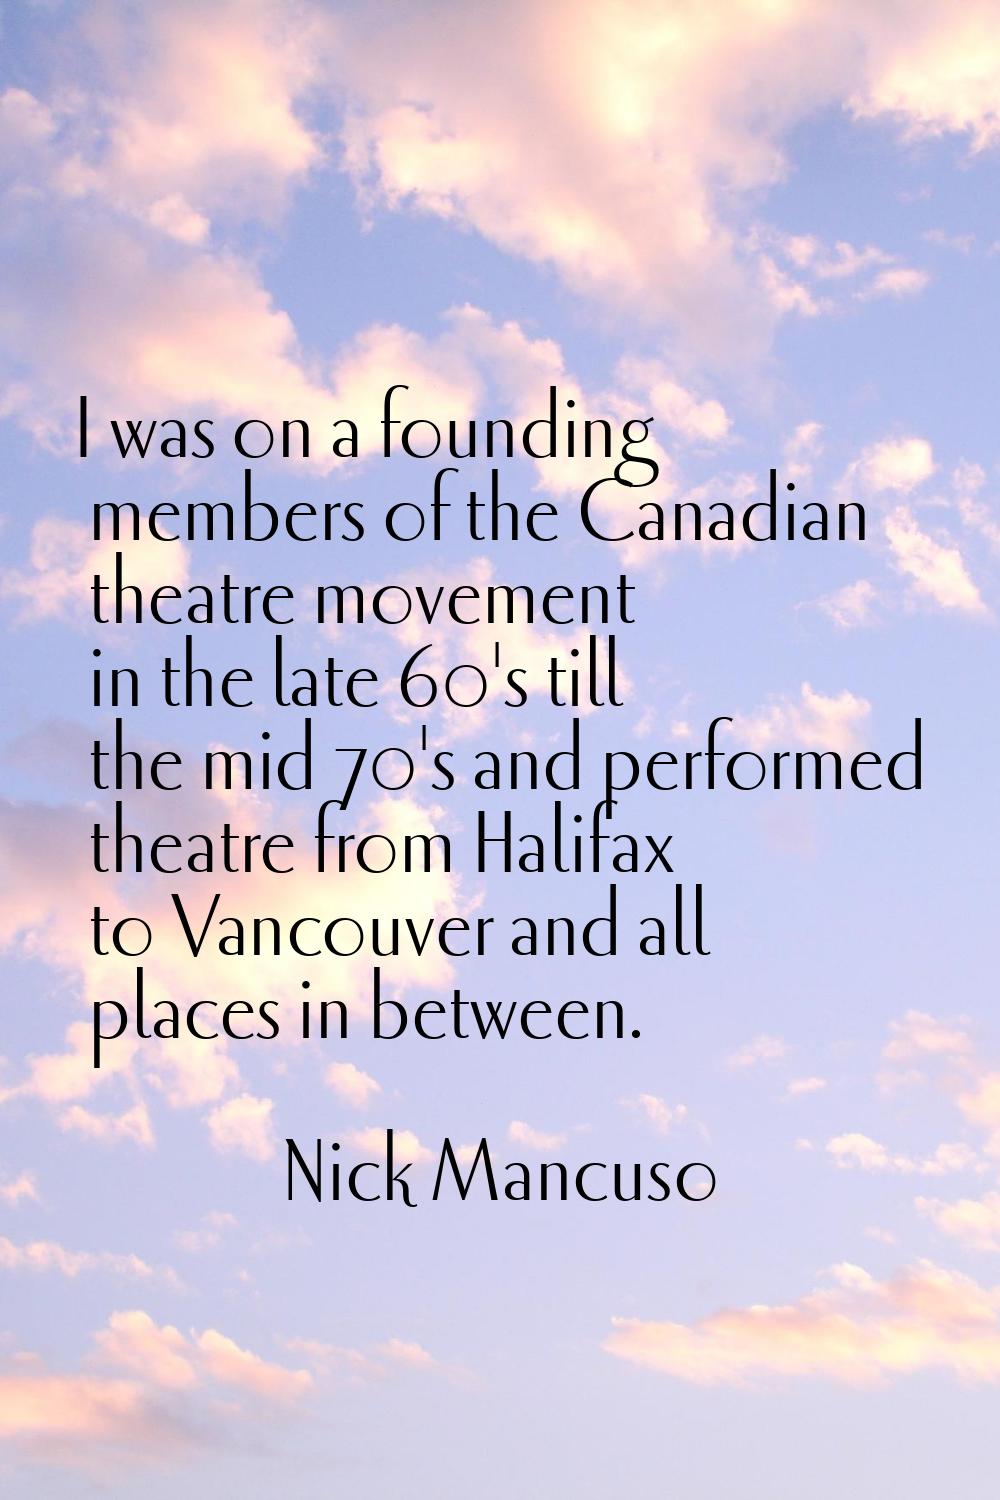 I was on a founding members of the Canadian theatre movement in the late 60's till the mid 70's and